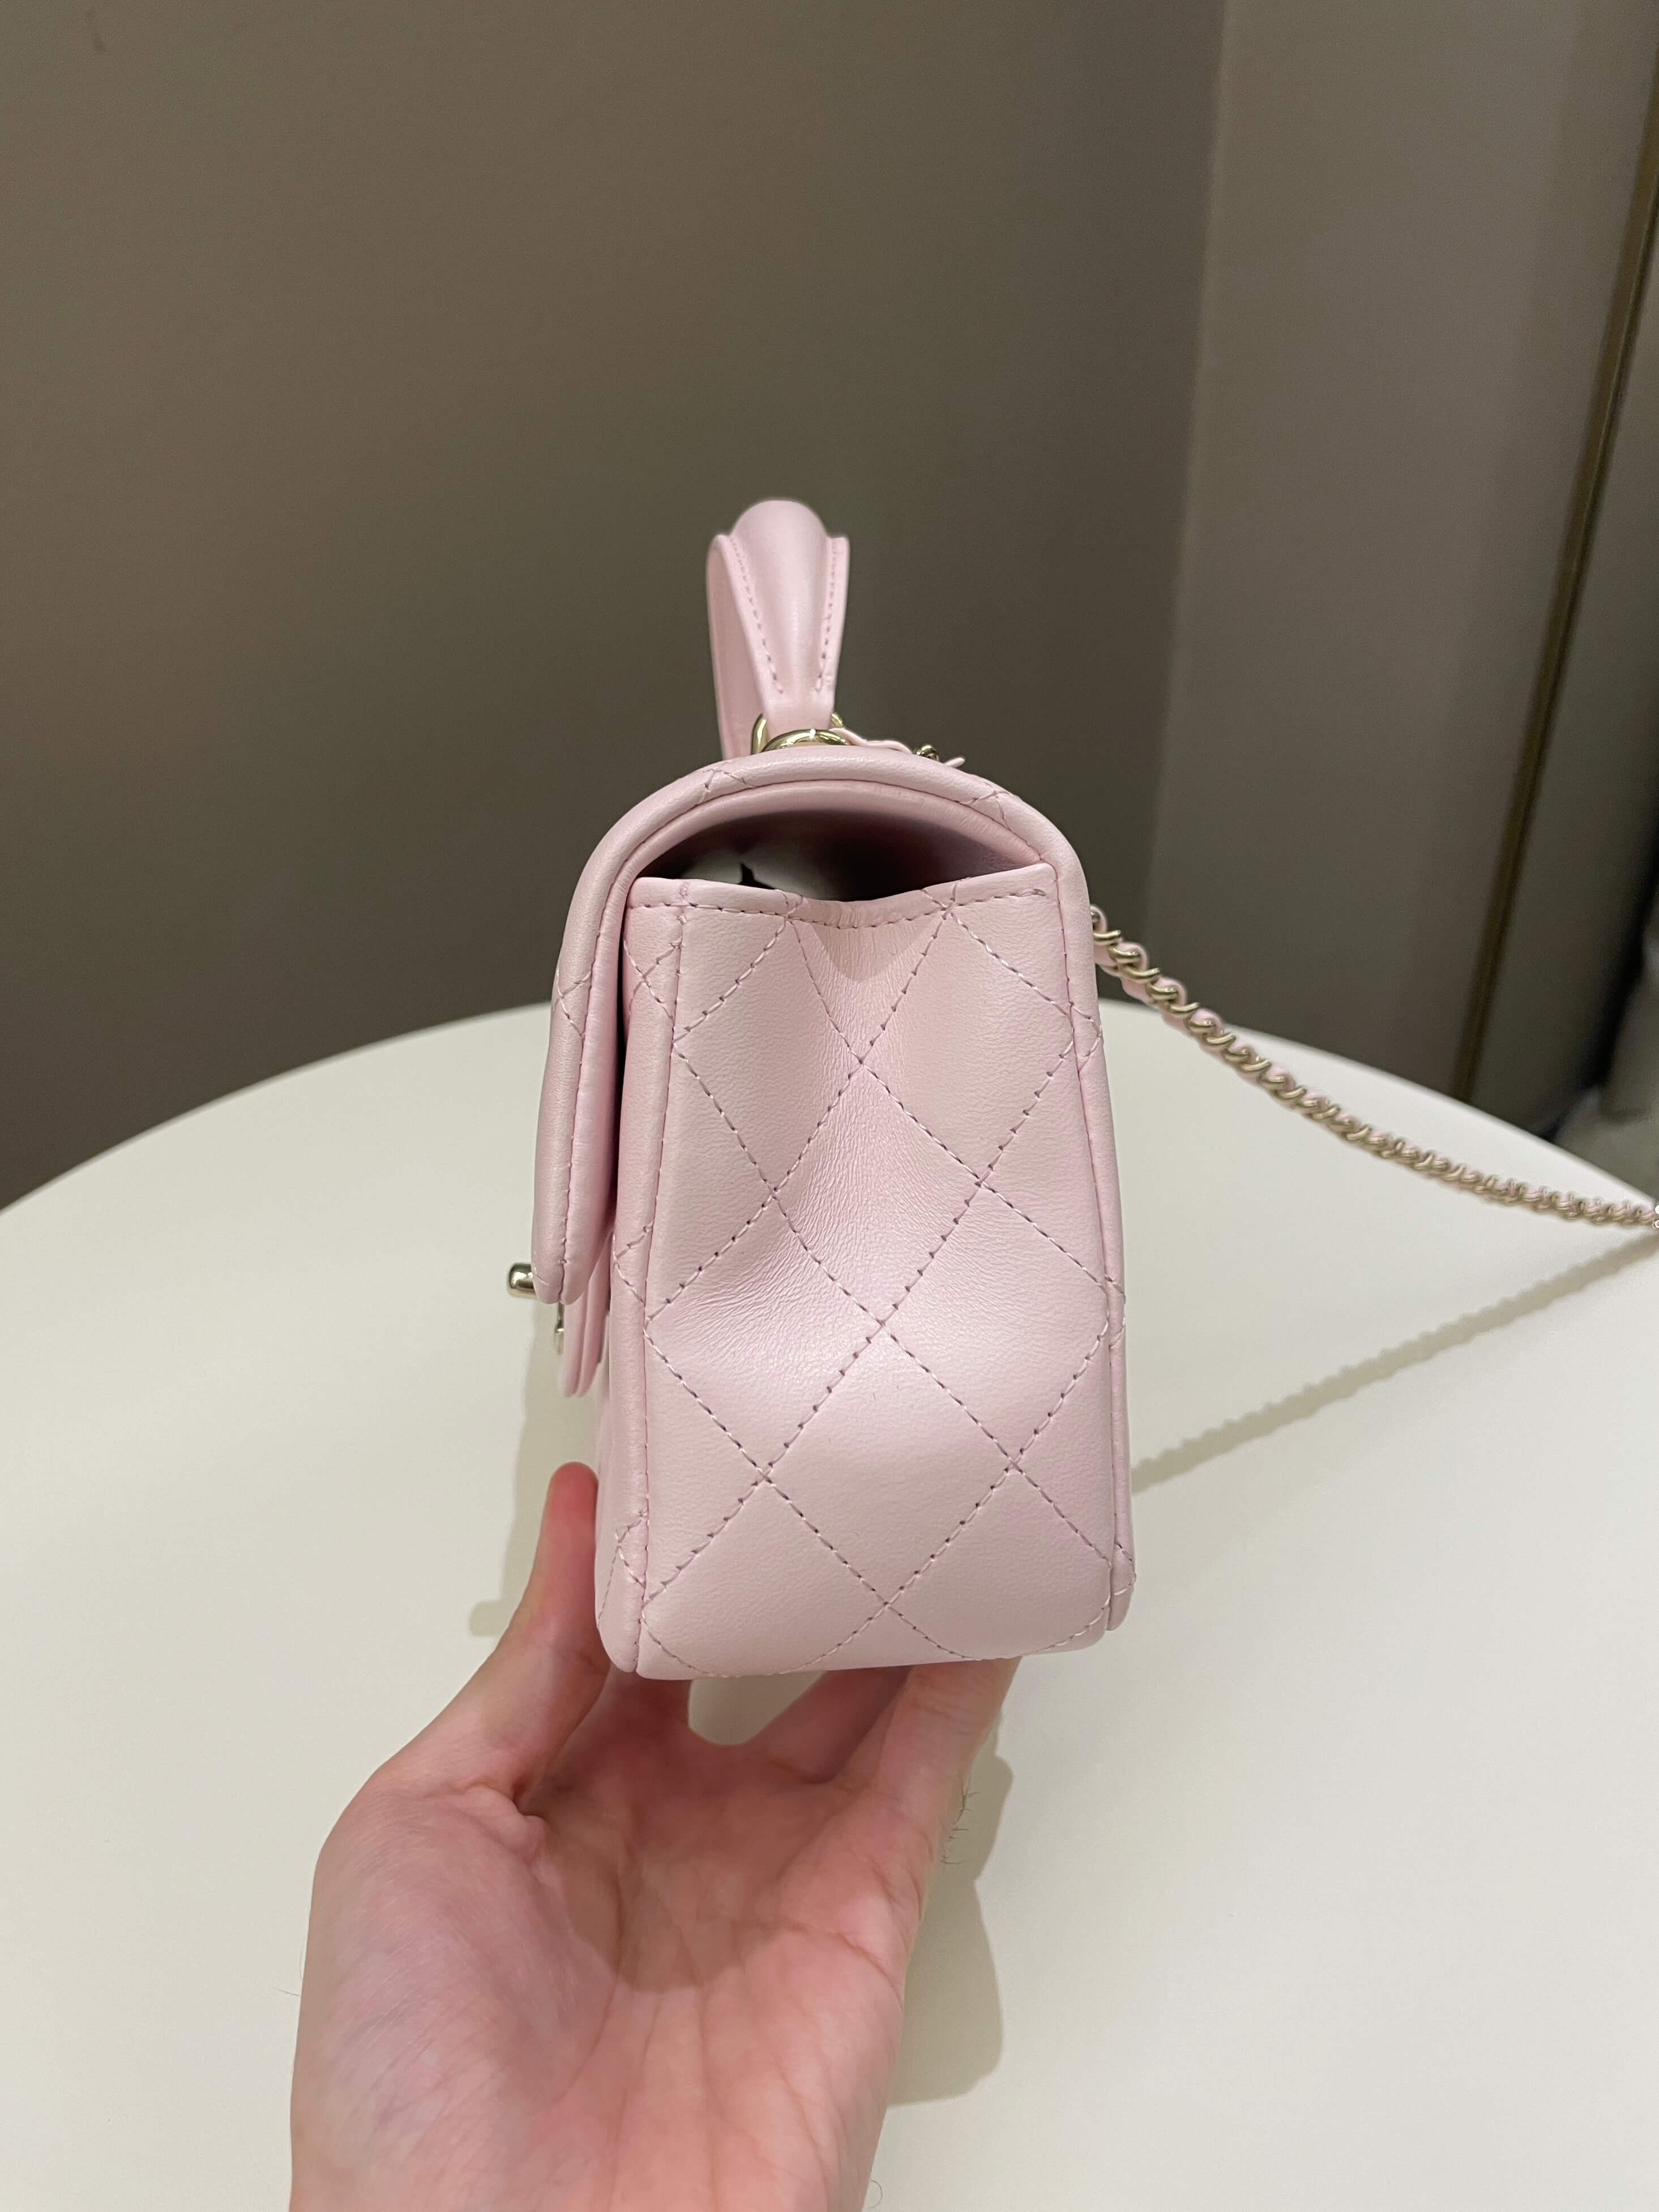 Chanel Quilted Top Handle Mini Rectangular Pale Pink Lambskin